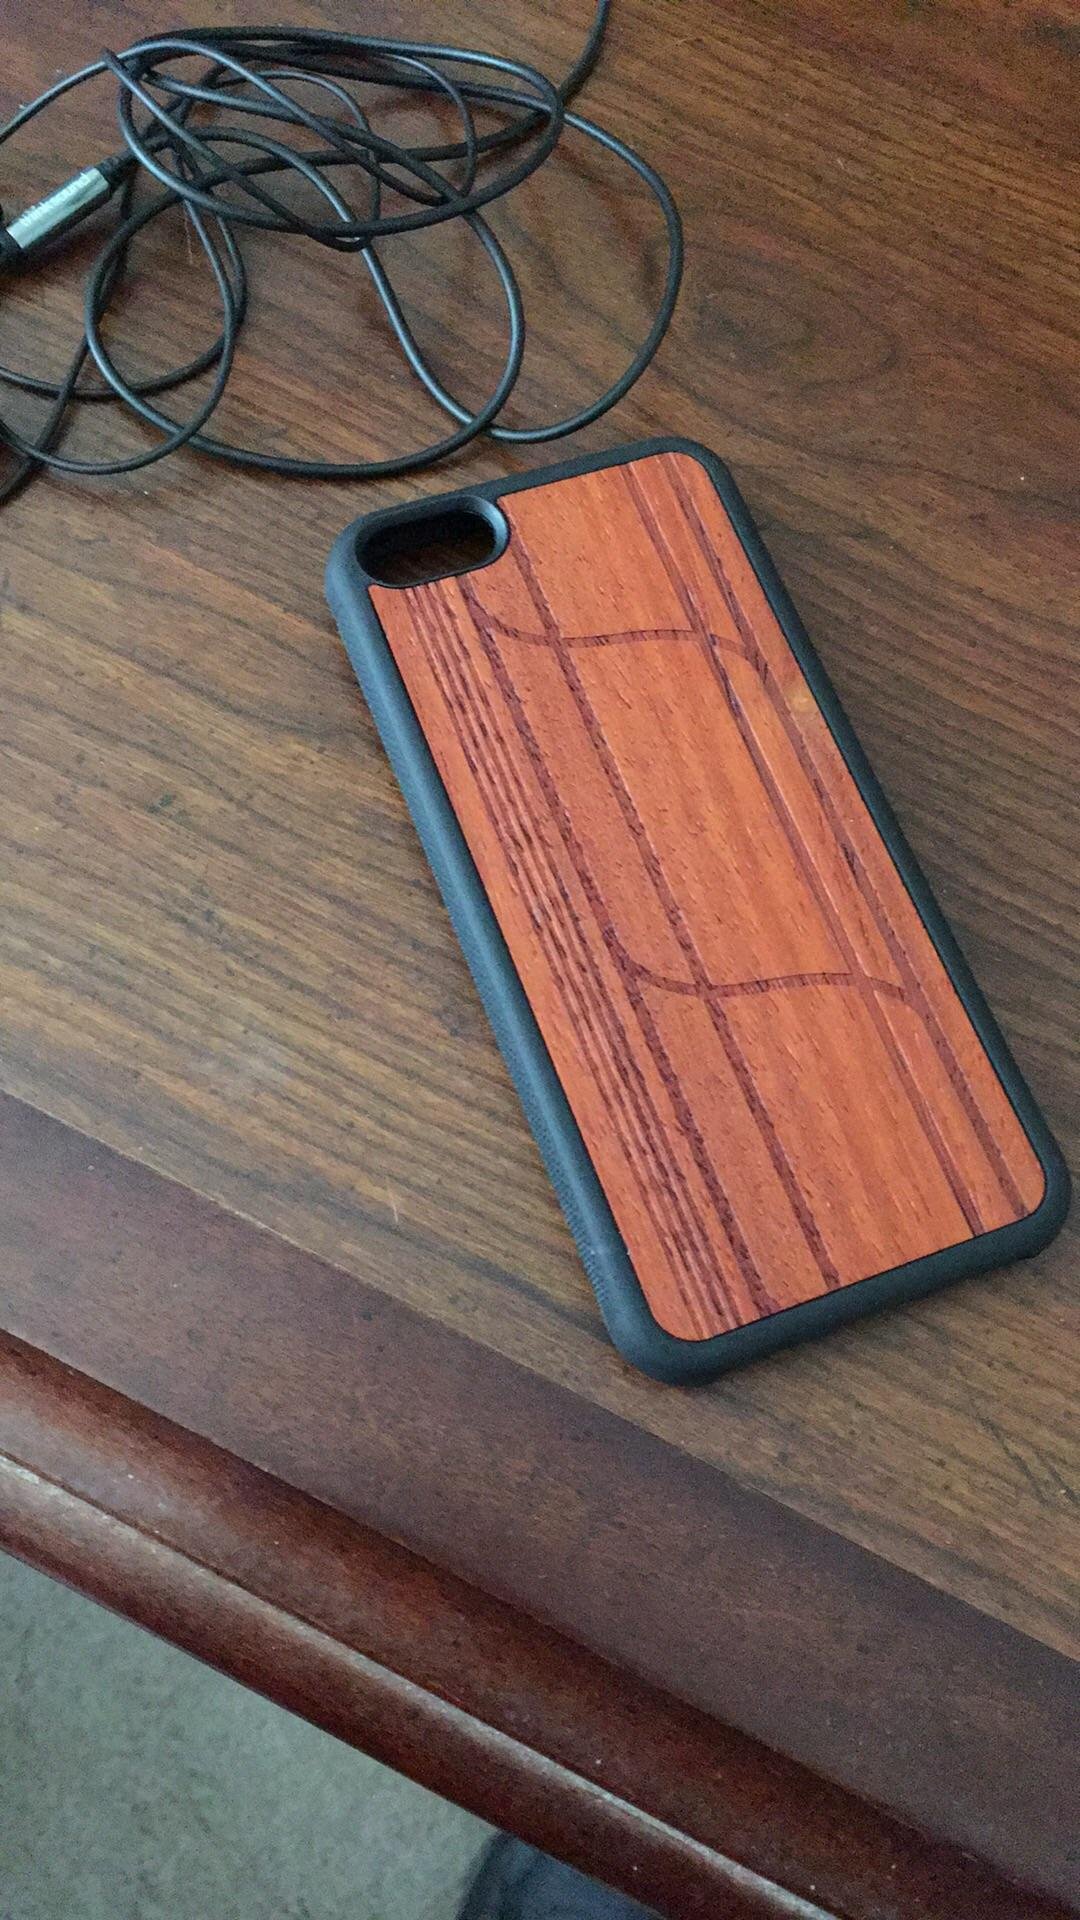 Wanted a subtle case that went with my wood headphones. I love it!